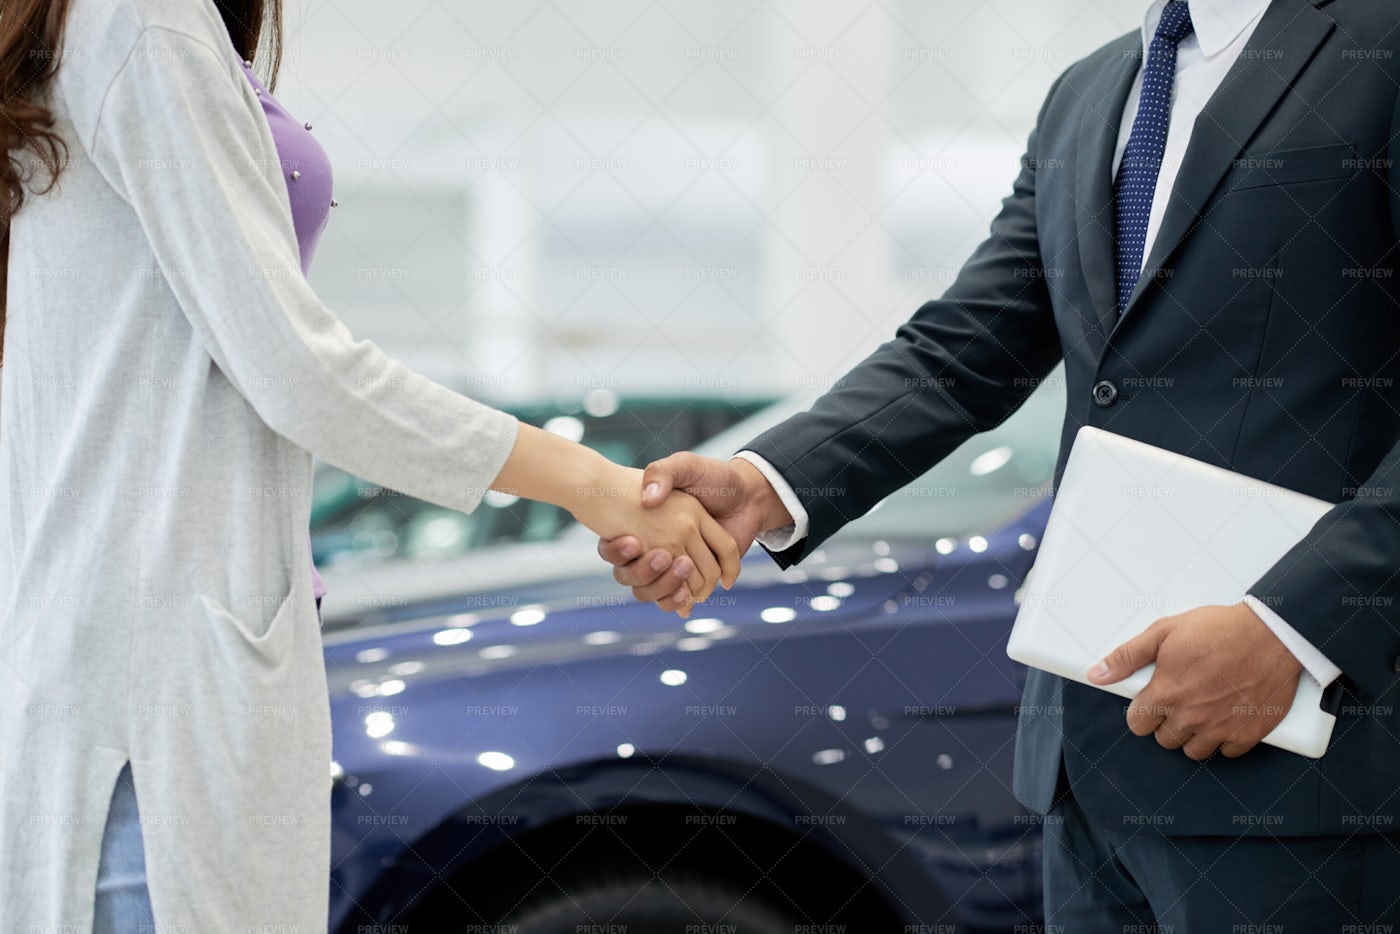 Shaking Hands With Client: Stock Photos